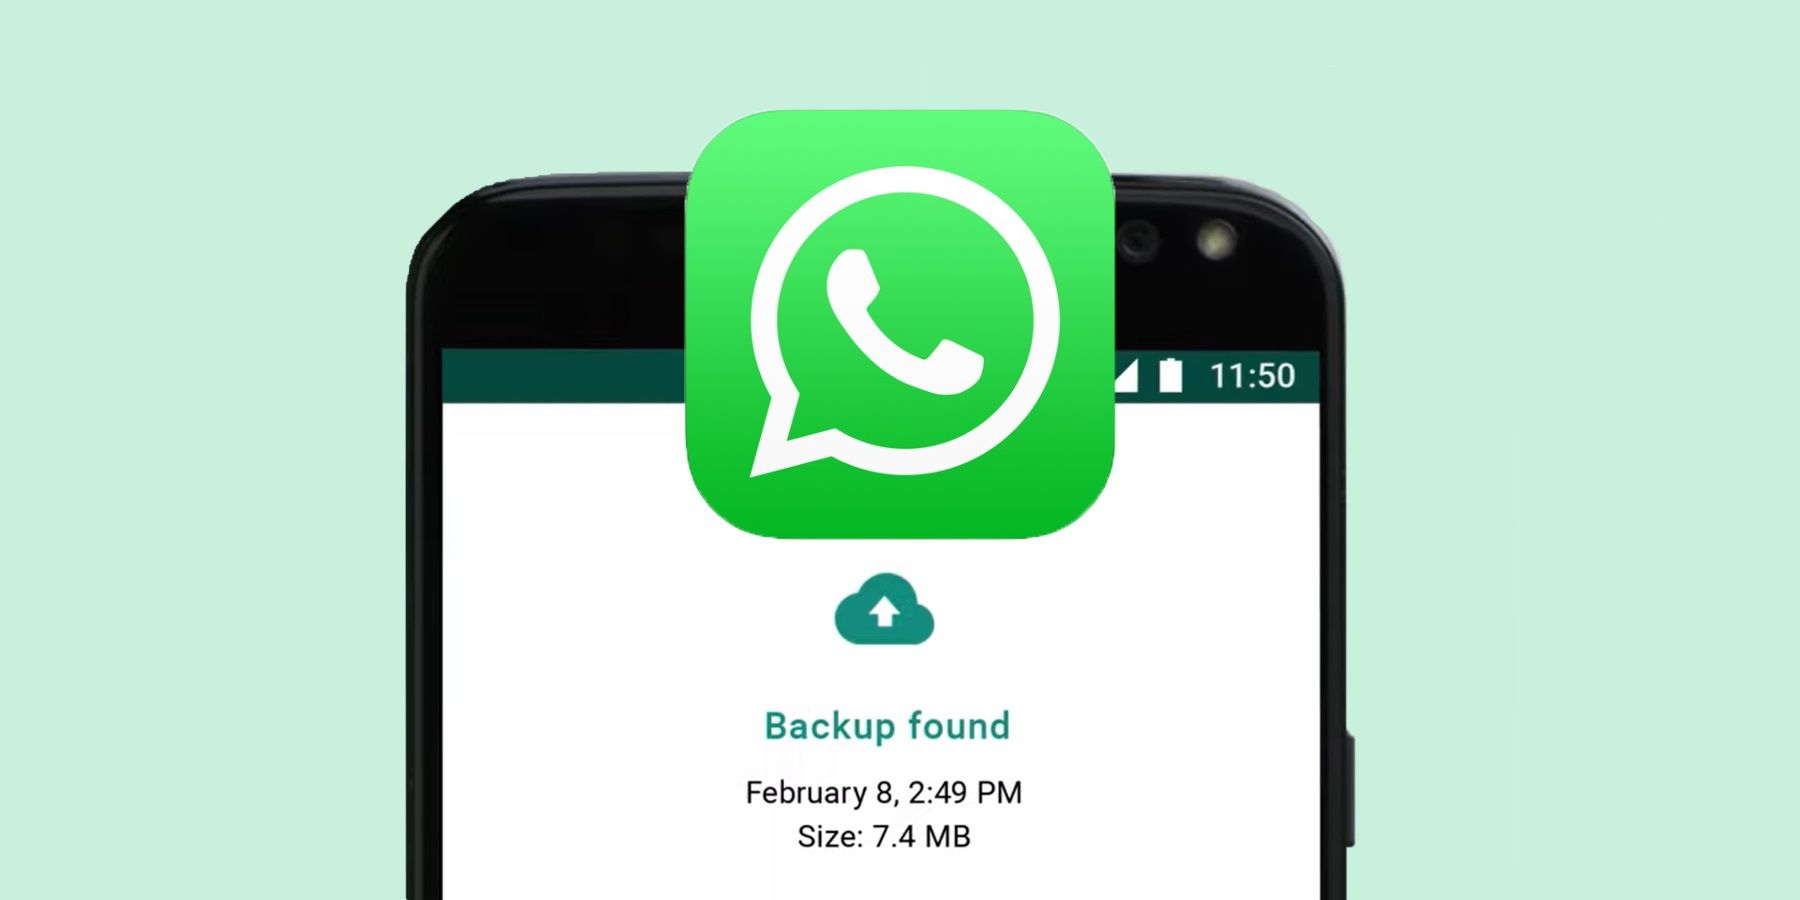 WhatsApp: How To Use Disappearing Messages (When They Launch)